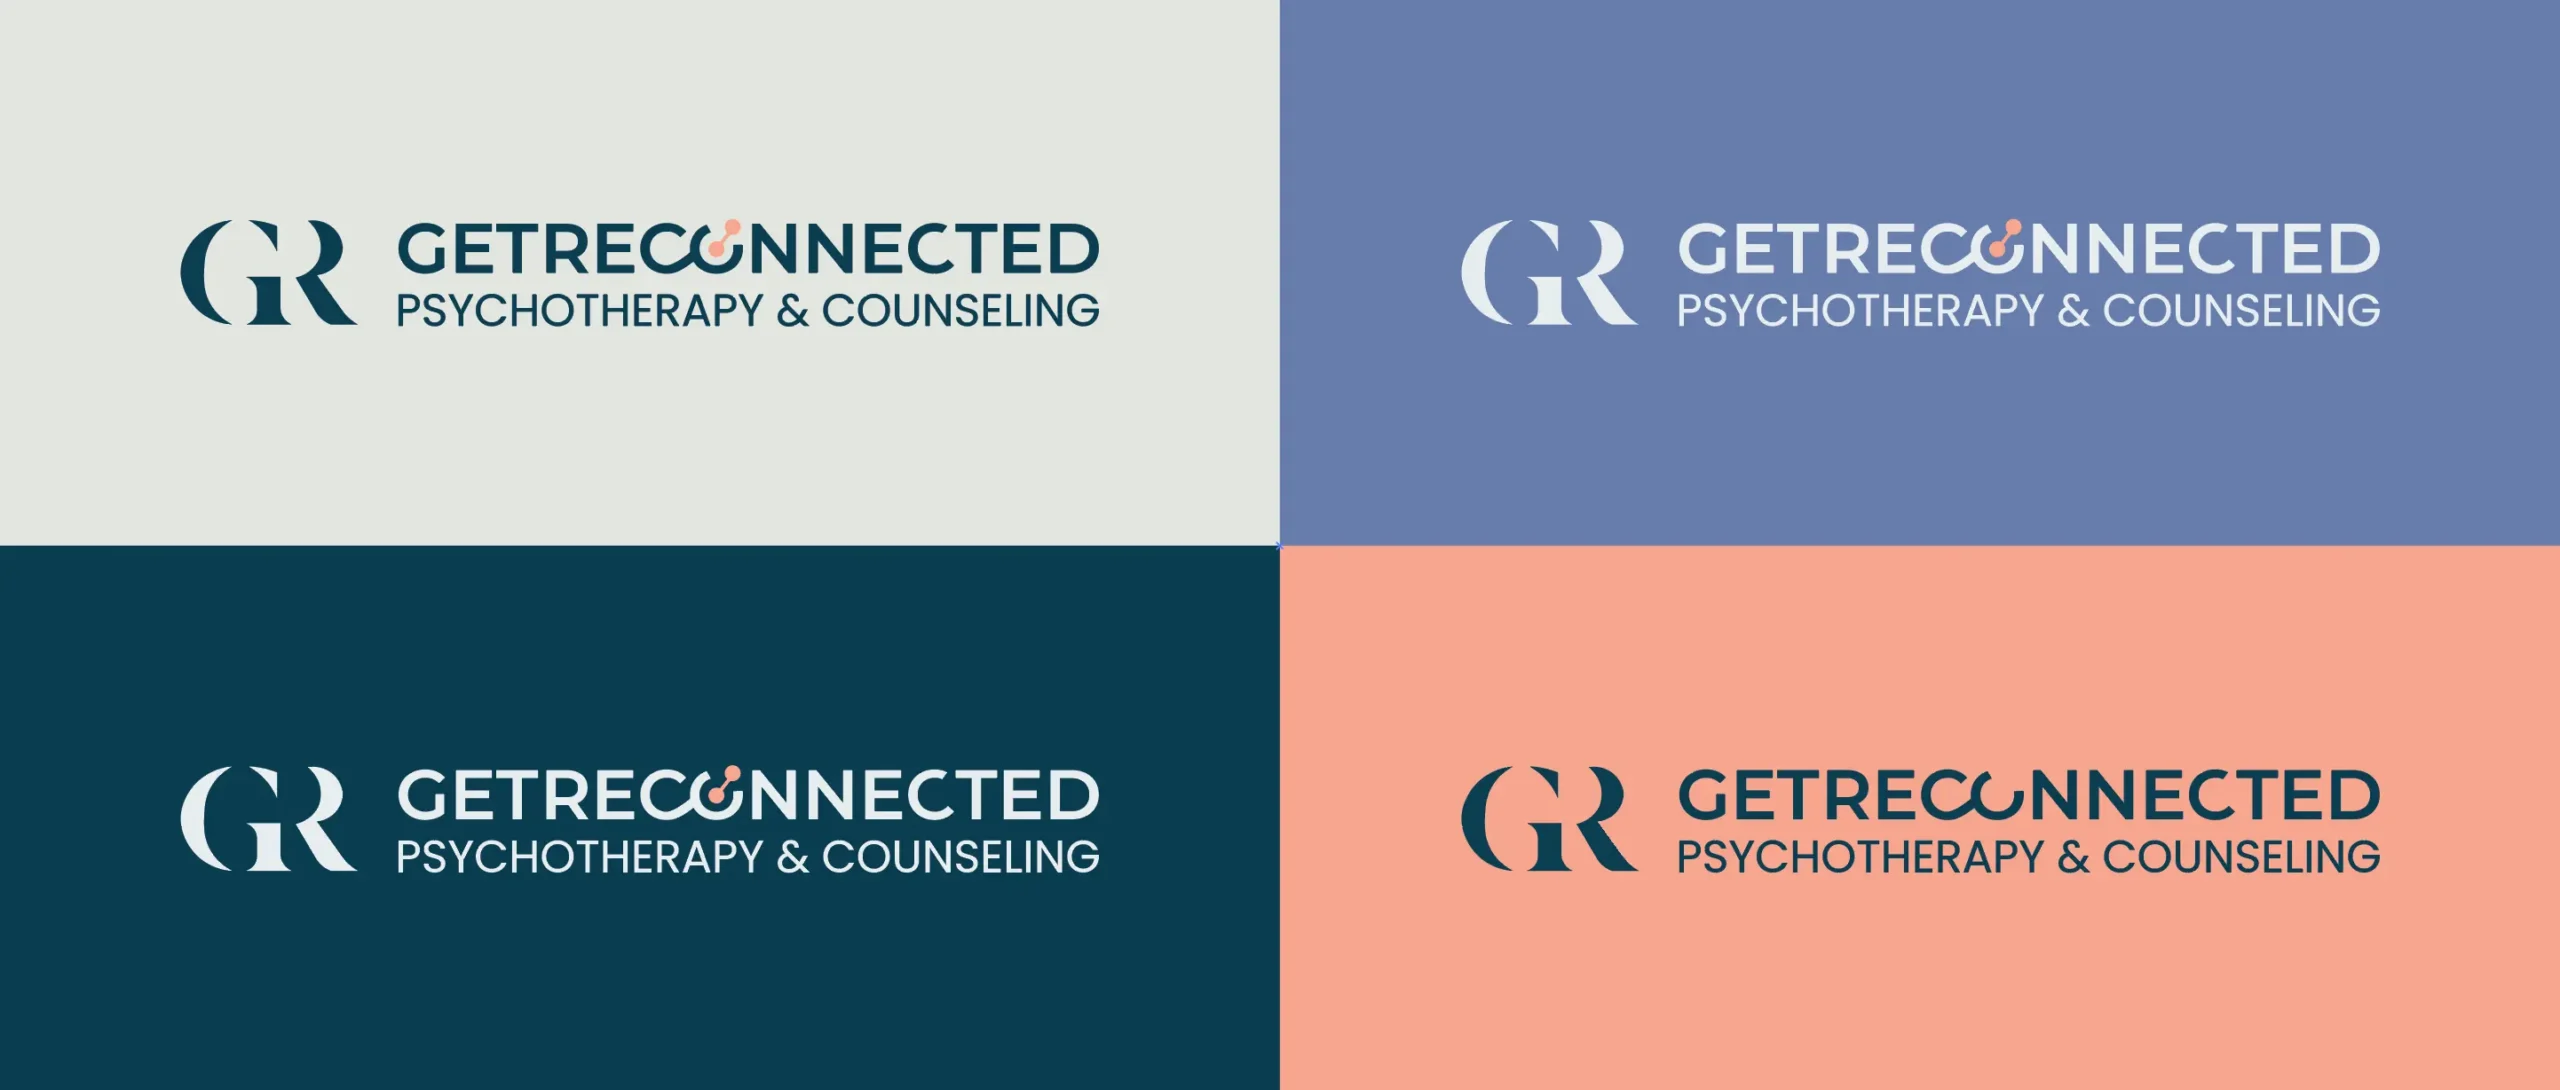 get reconnected logo horizontal variant scaled